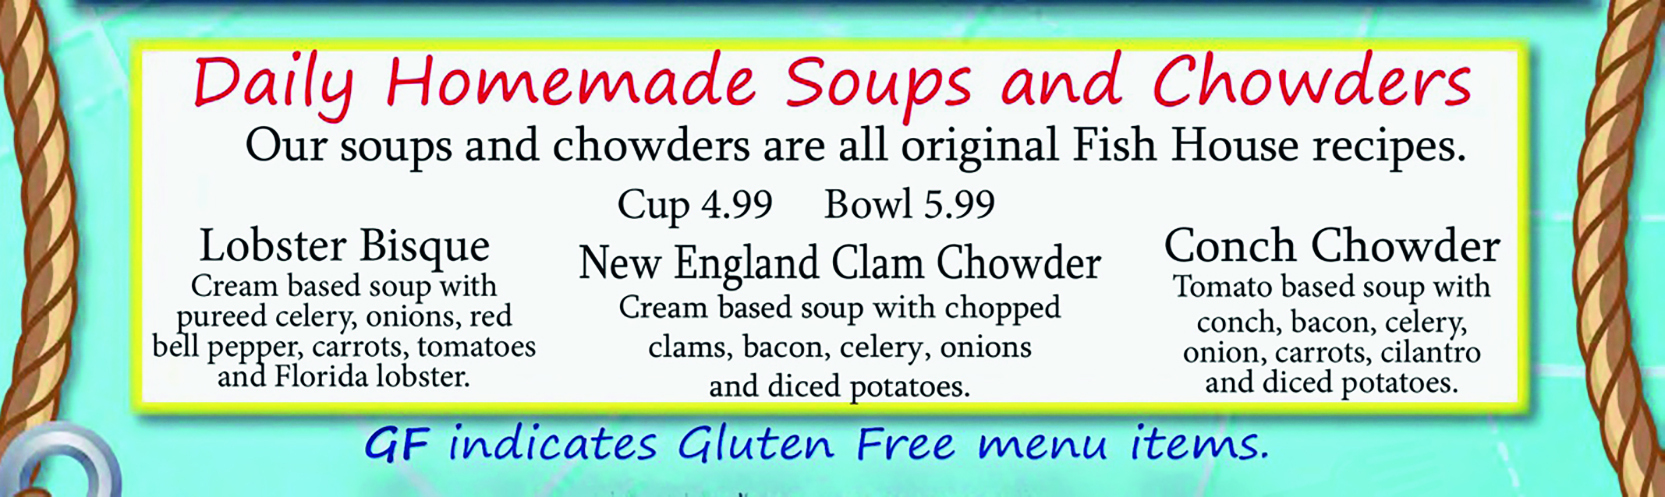 Menu. Menu do restaurante Fish House. Daily Homemade Soups and Chowders Our soups and chowders are all original Fish House recipes. Cup 4.99 Bowl 5.99 Lobster Bisque Cream based soup with pureed celery, onions, red bell pepper, carrots, tomatoes and Florida lobster. New England Clam Chowder Cream based soup with chopped clams, bacon, celery, onions and diced potatoes. Conch Chowder Tomato based soup with conch, bacon, celery, onion, carrots, cilantro and diced potatoes. GF indicates gluten free menu items.